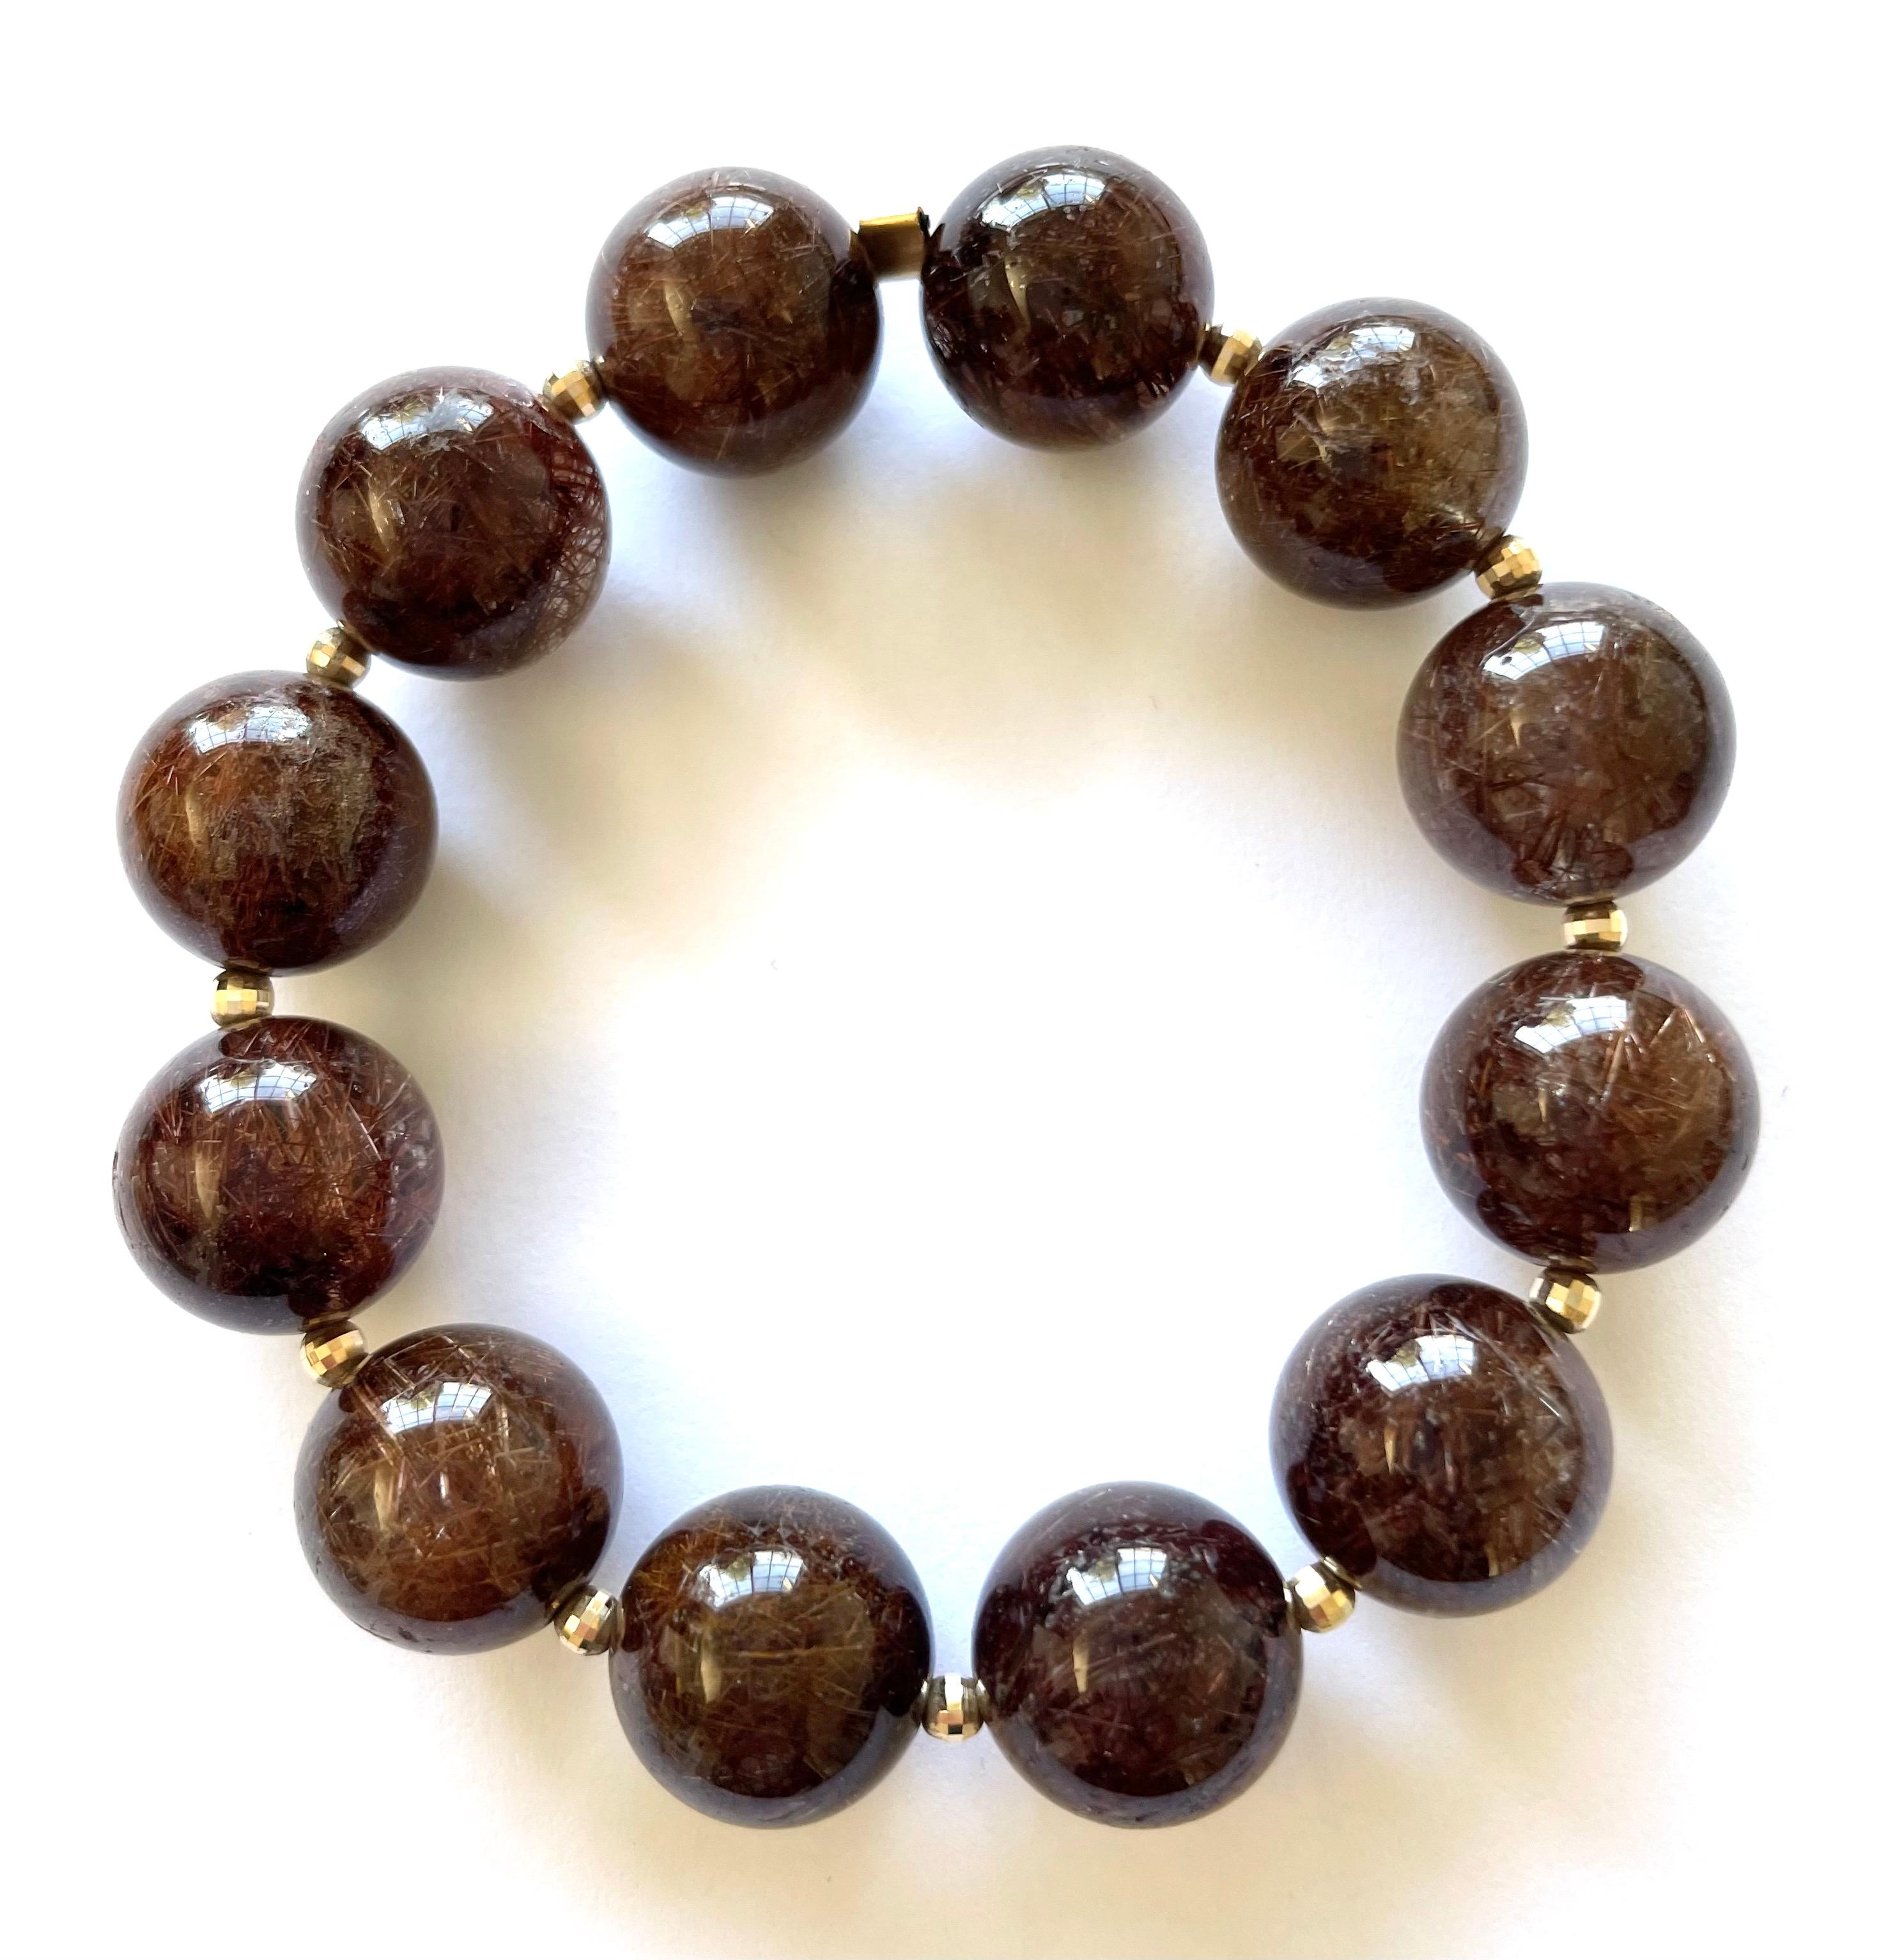 Description
Superior quality coppery-brown Rutilated Quartz stretchy bracelet, accented with 14k yellow gold faceted balls.
Item # B1253

Materials and Weight
Rutilated Quartz, 15mm, 250 carats.
3mm faceted balls, 14k yellow gold. 

Dimension 
Size